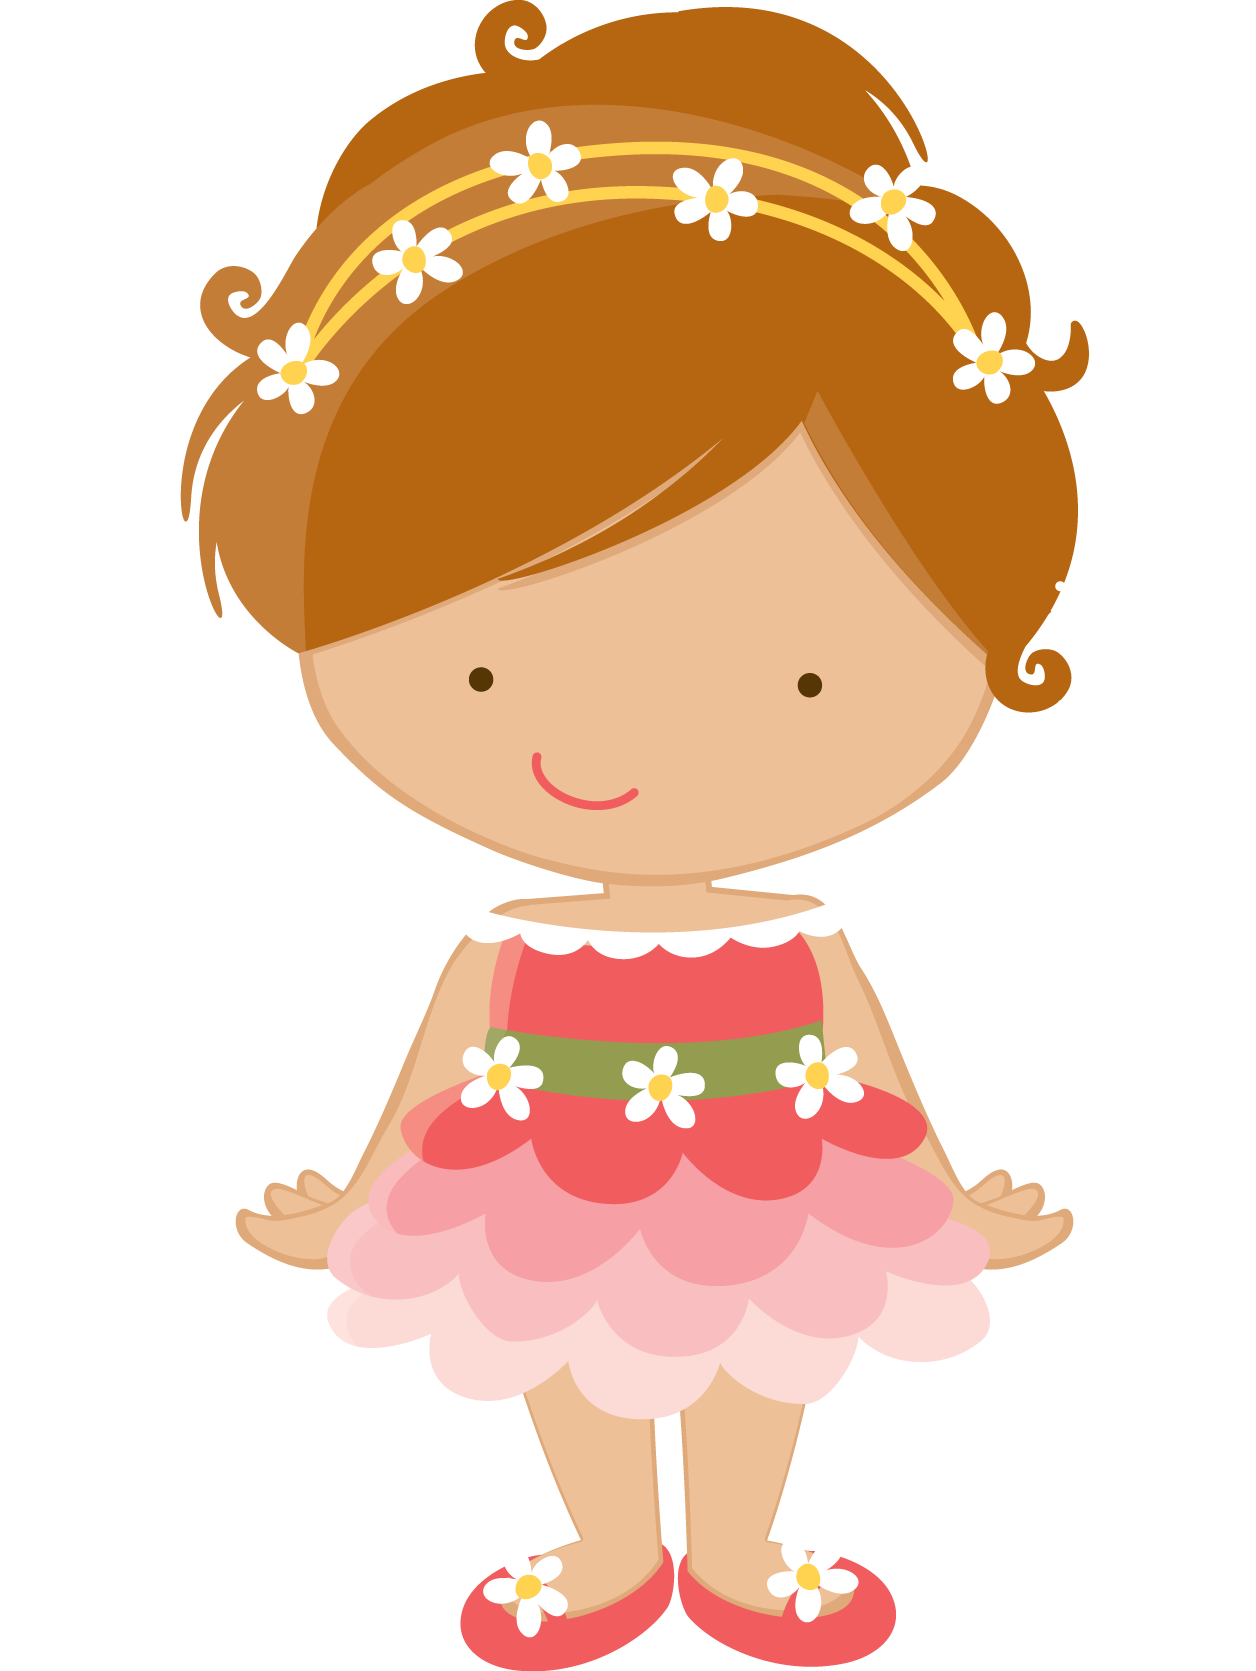 Zwd fairy png minus. Folder clipart pink